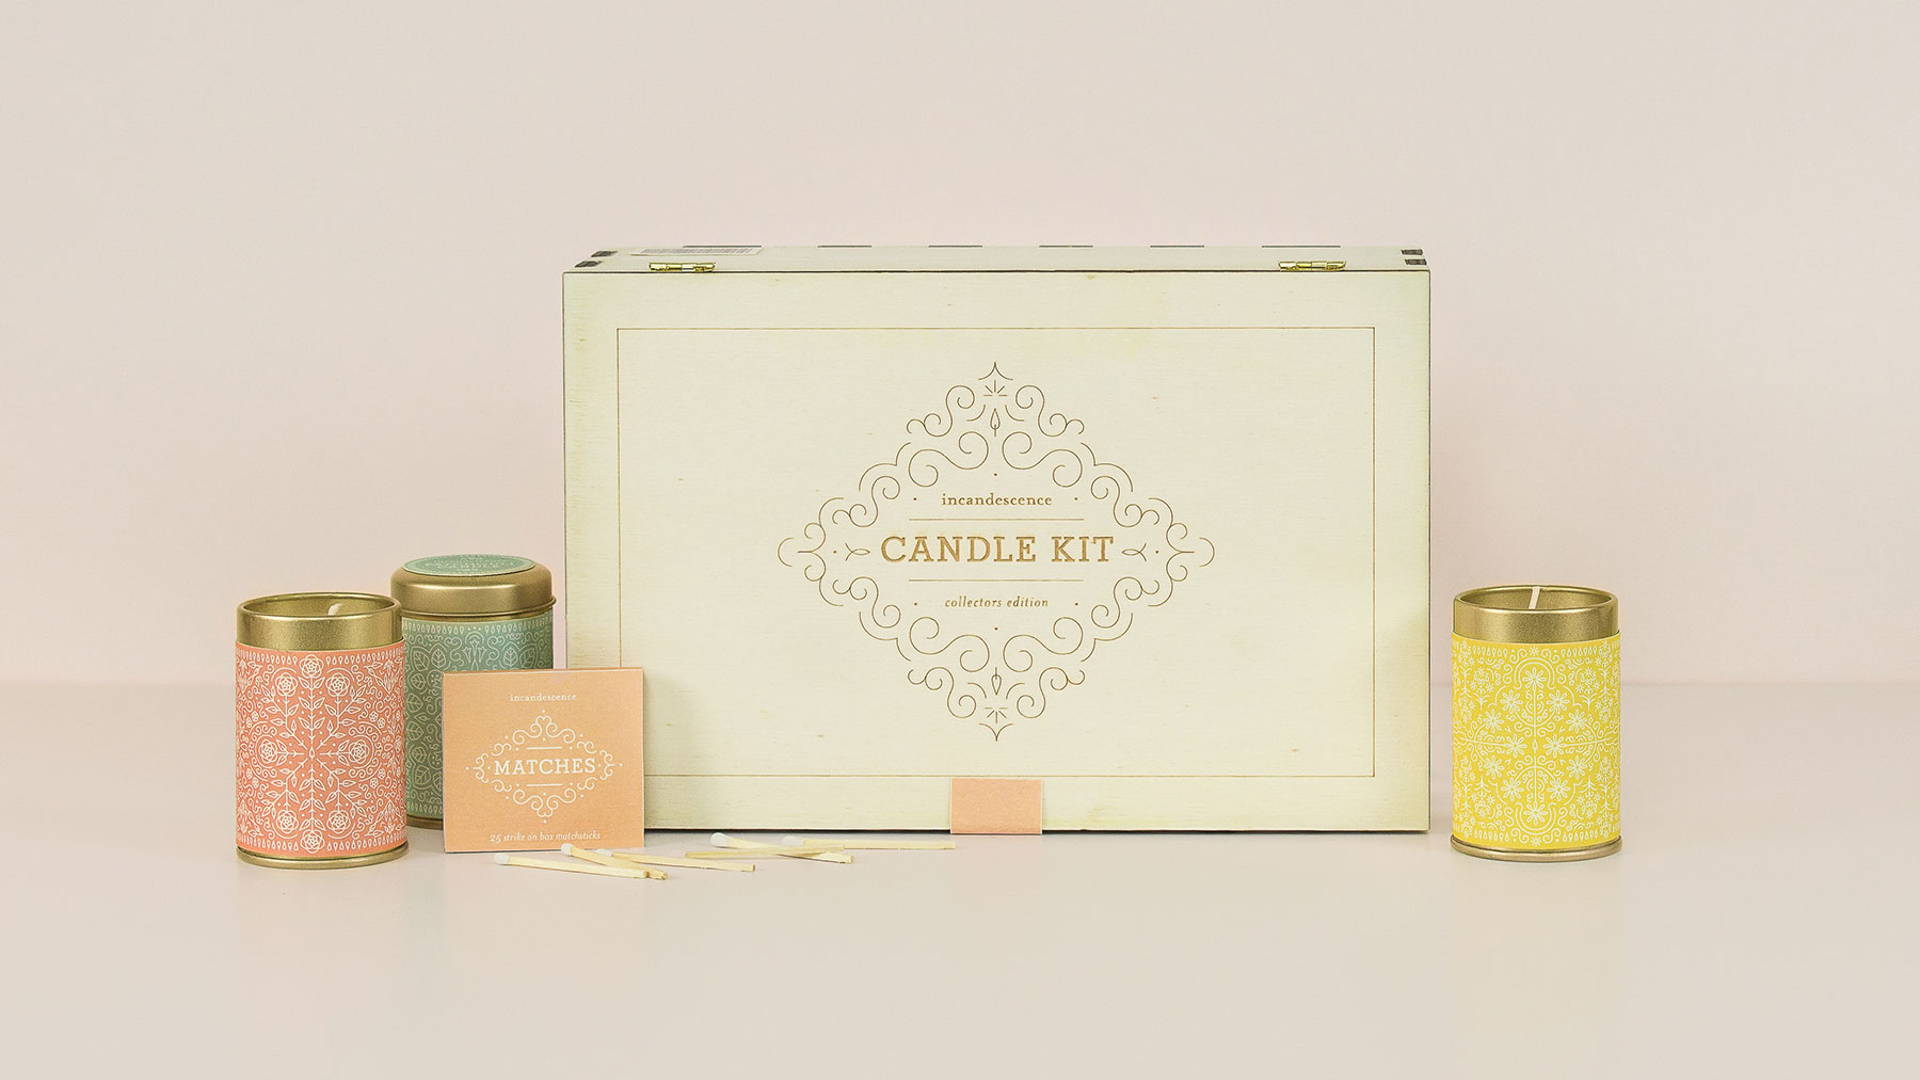 Featured image for This Candle Kit Comes With Airy Feminine Packaging